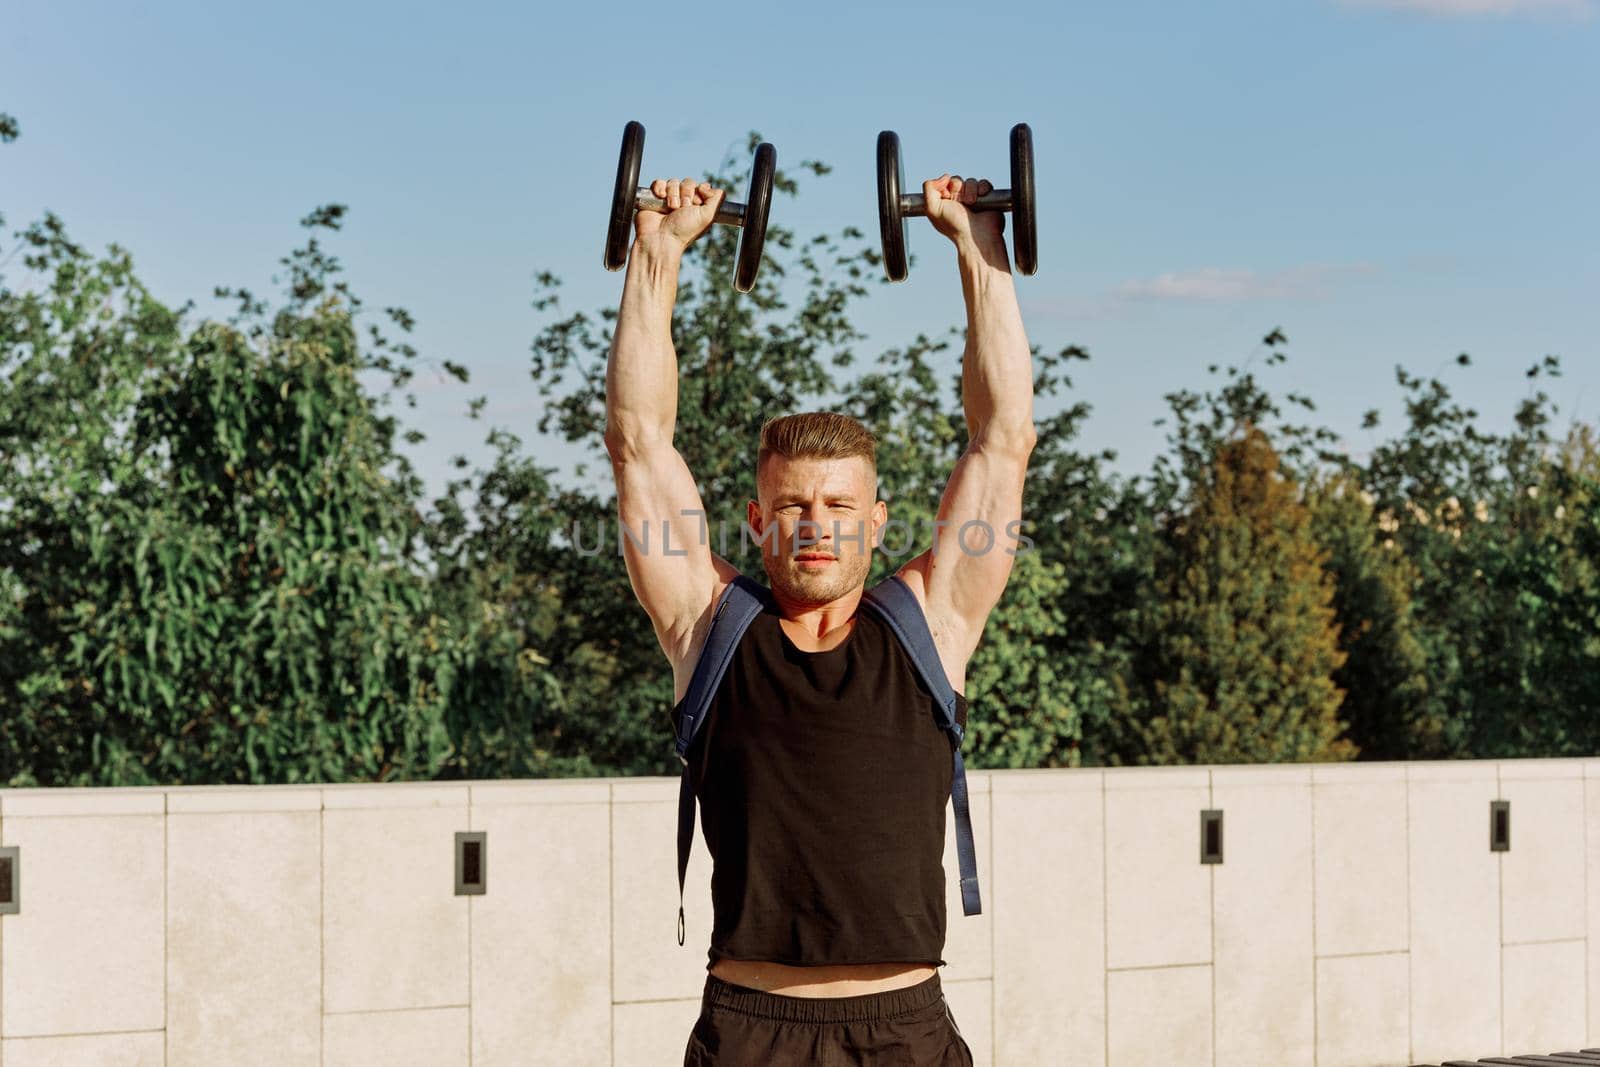 athletic man with dumbbells with pumped up body workout. High quality photo